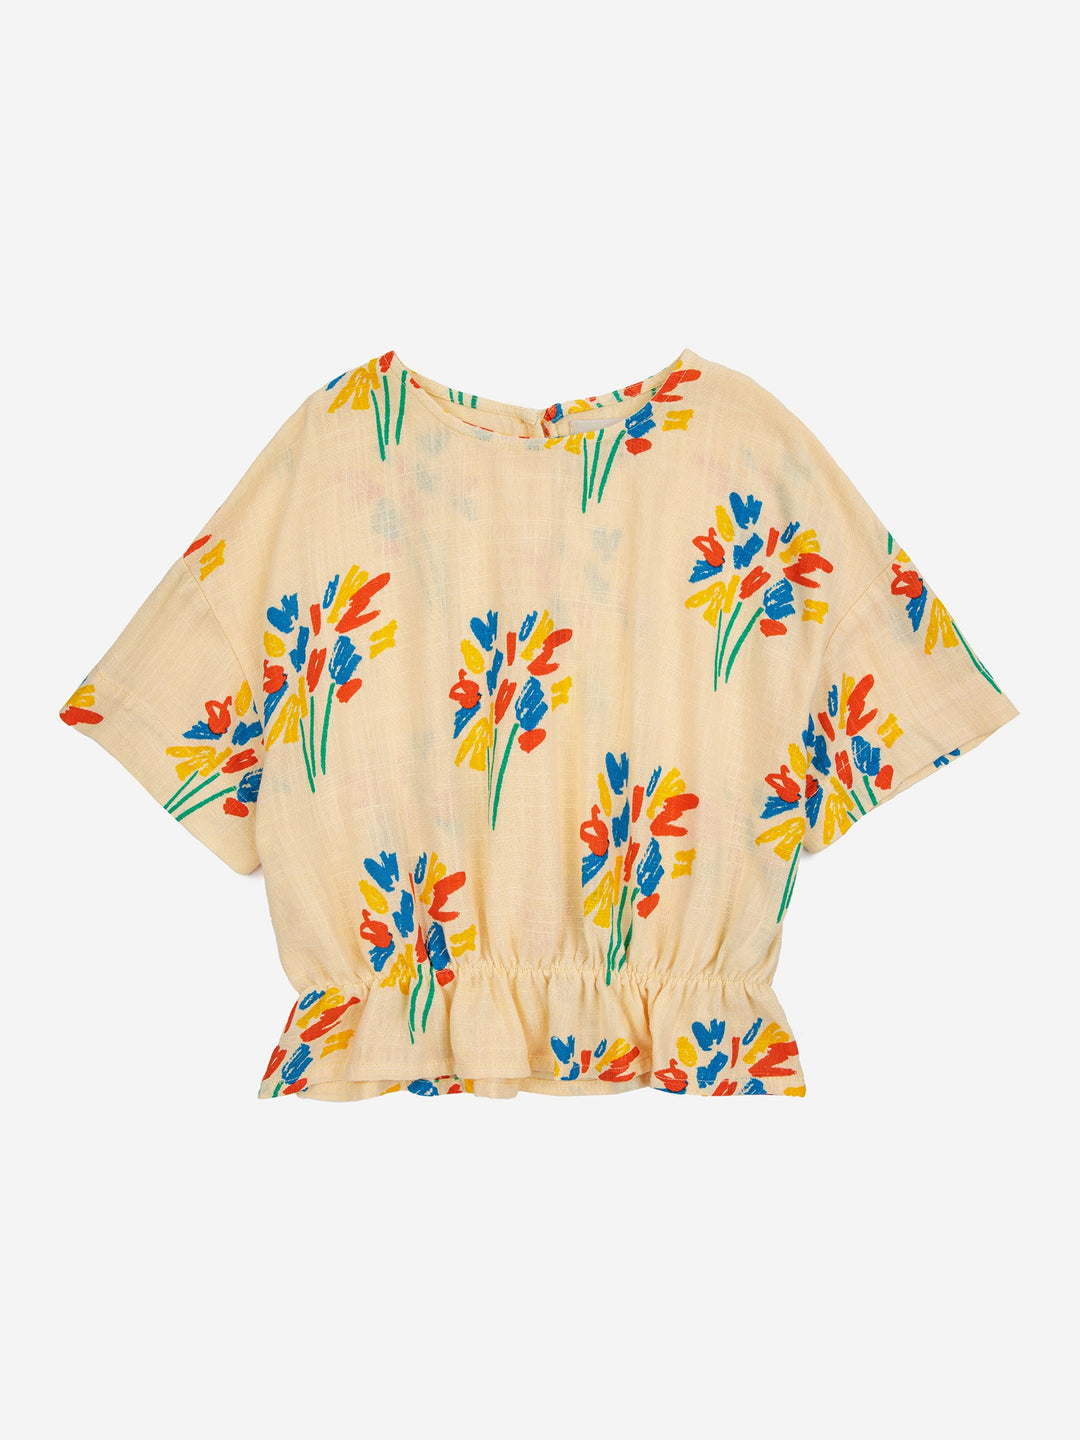 Blouse Fireworks Woven All Over Light Yellow